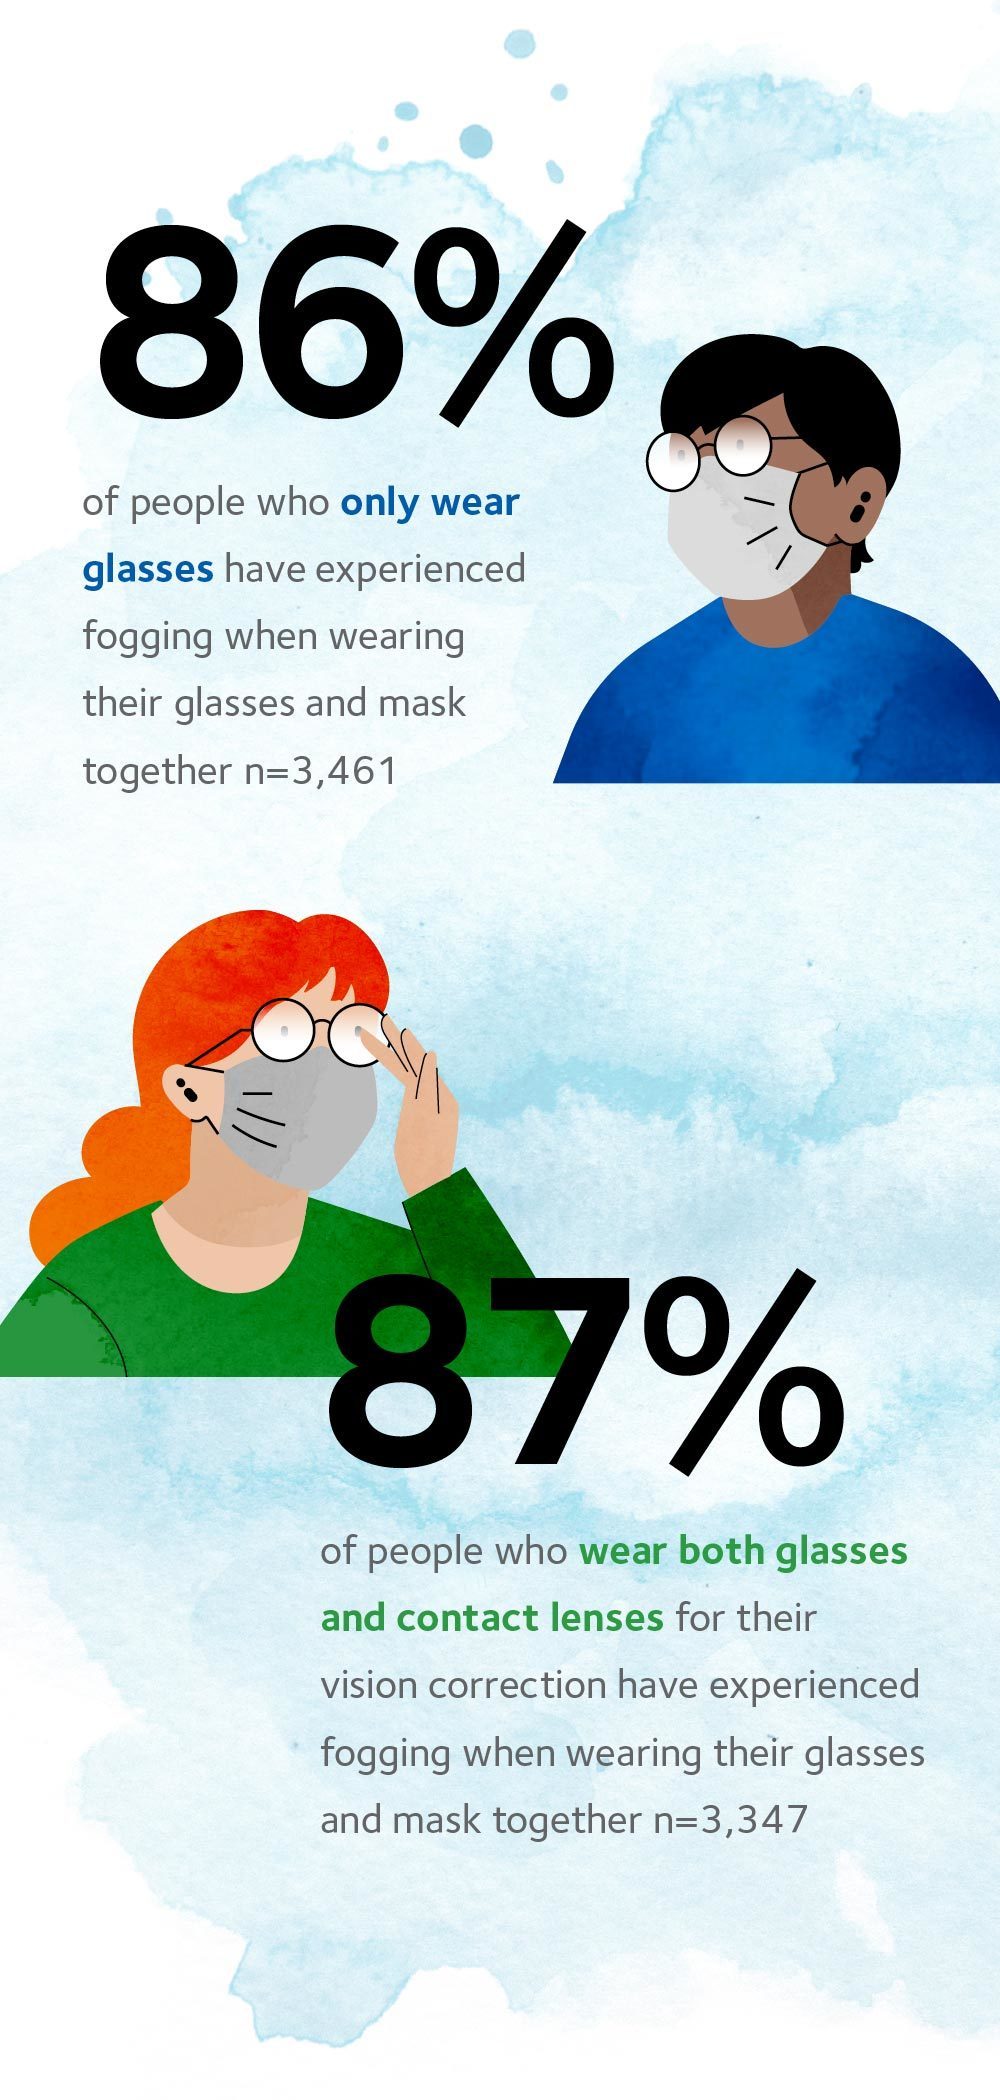 87% of glasses/contact wearers experience fogging when wearing glasses with mask.